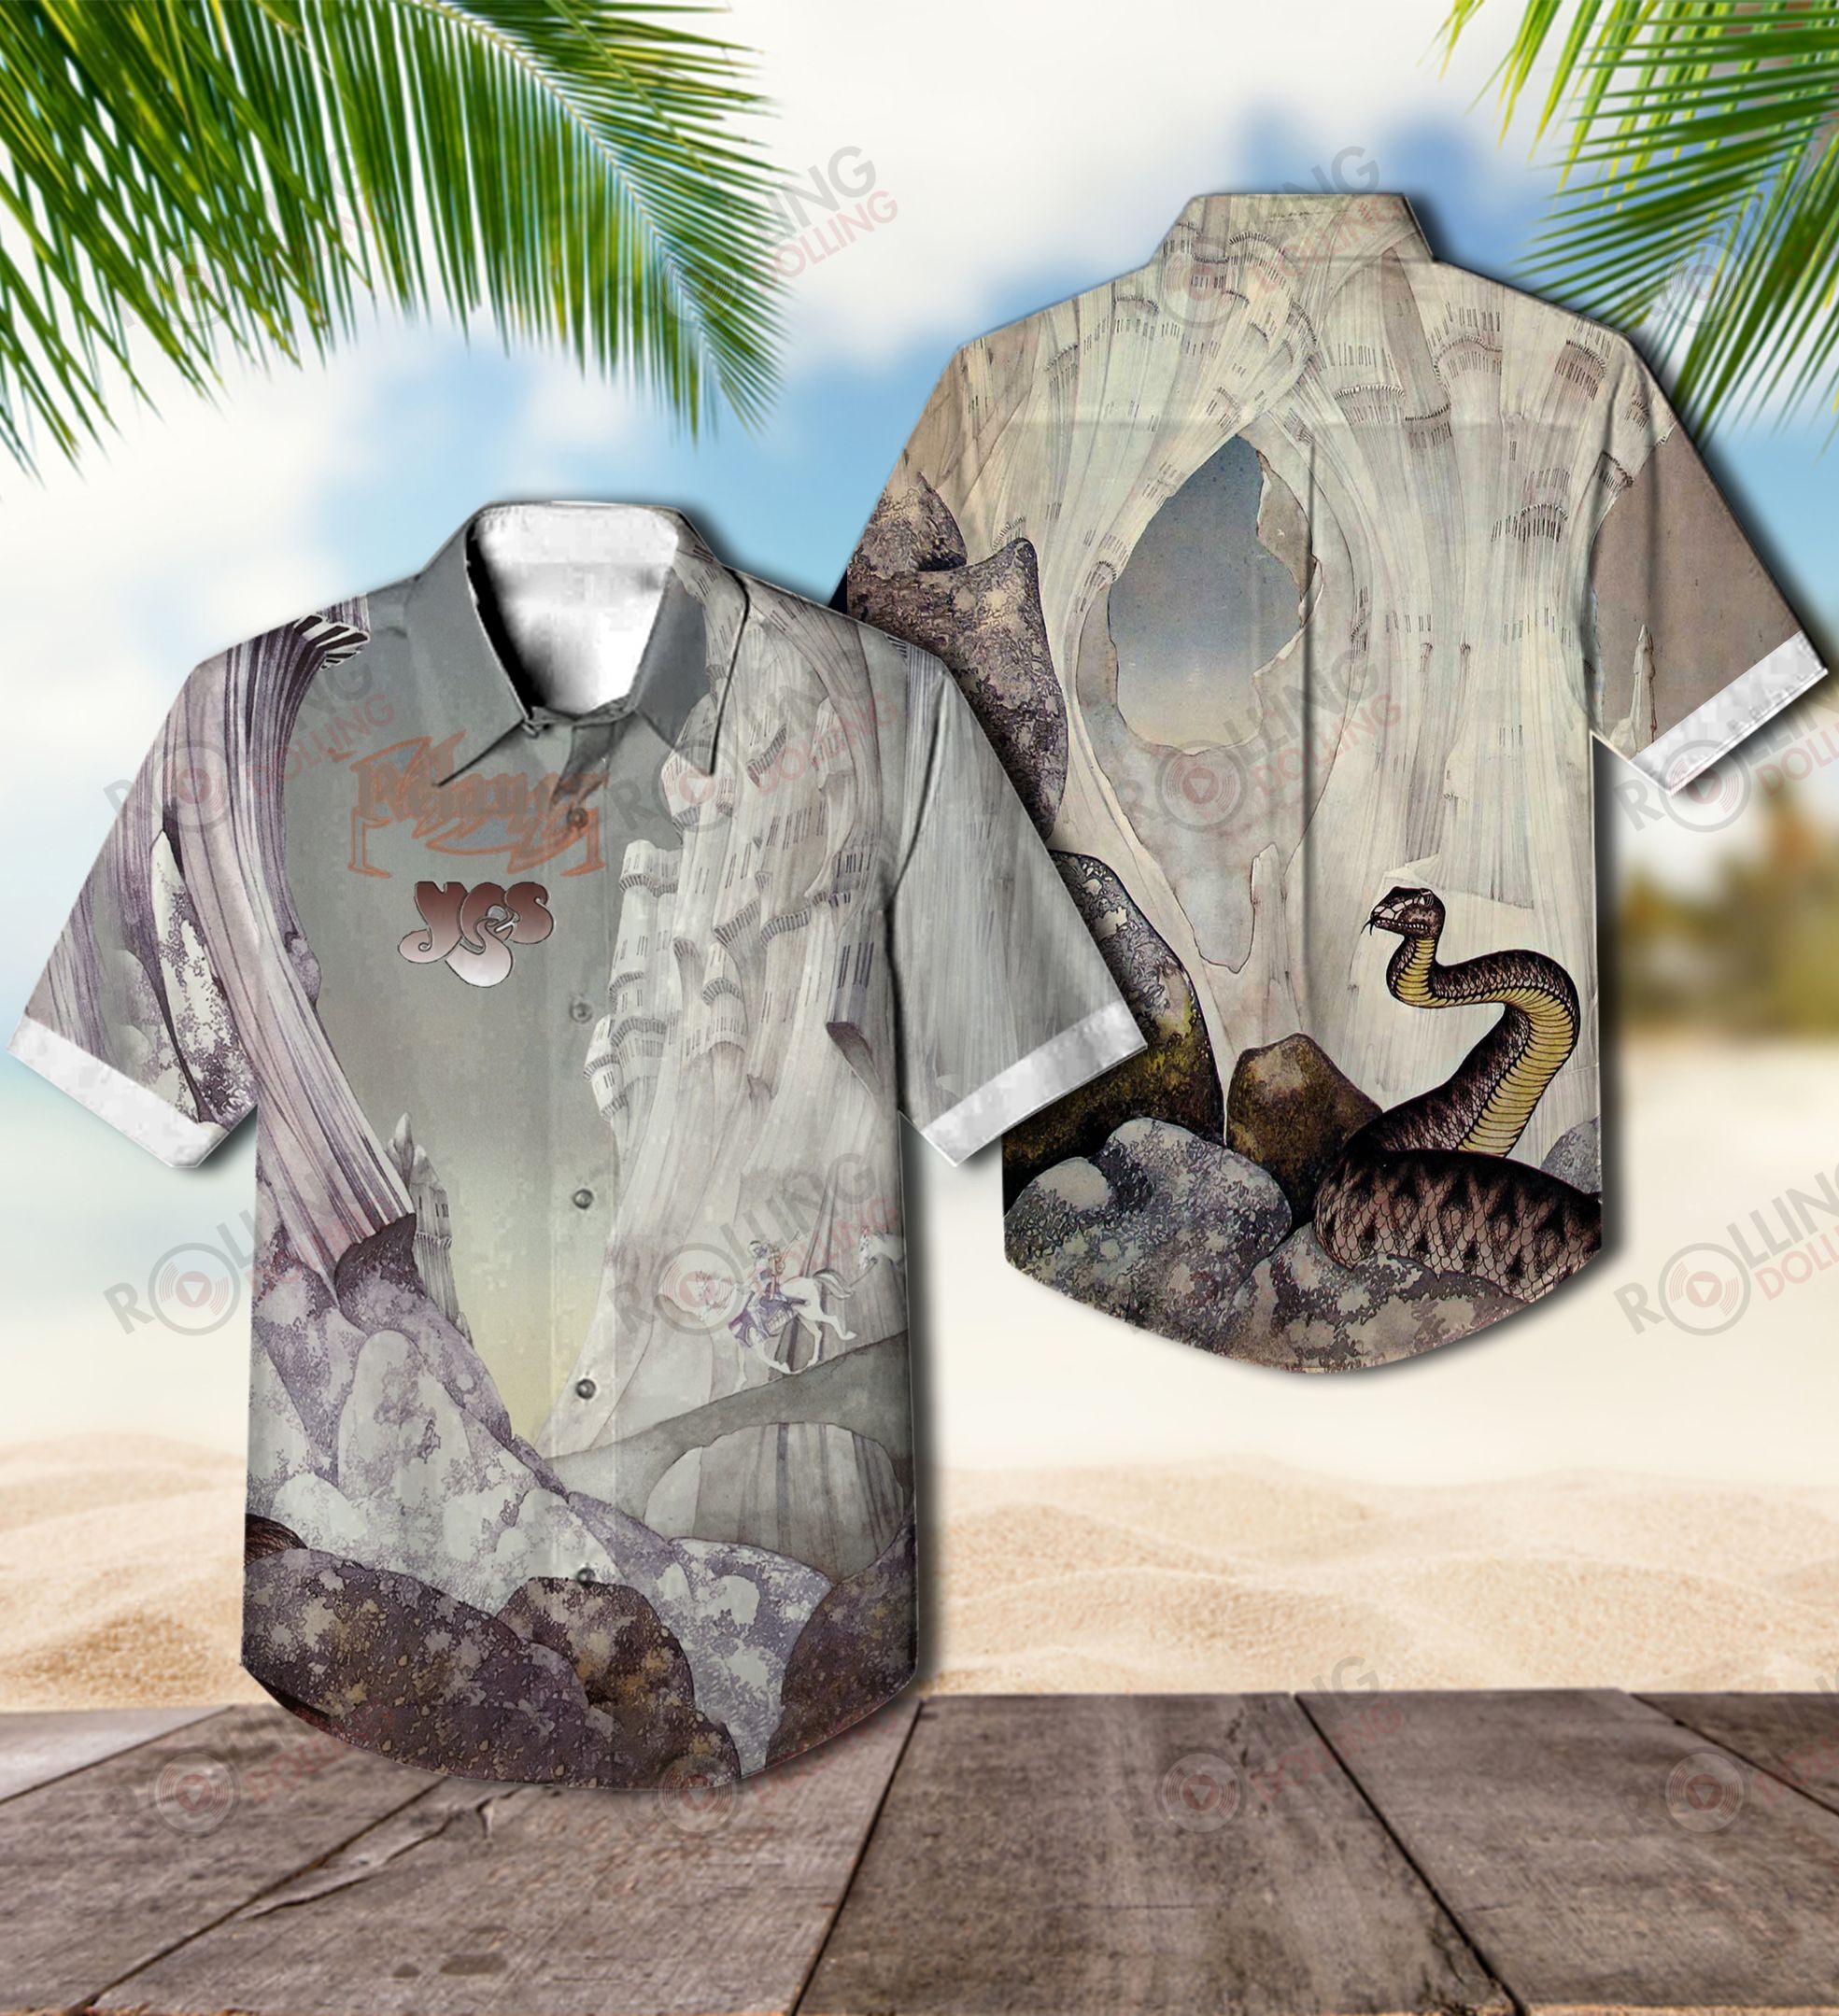 You'll have the perfect vacation outfit with this Hawaiian shirt 355